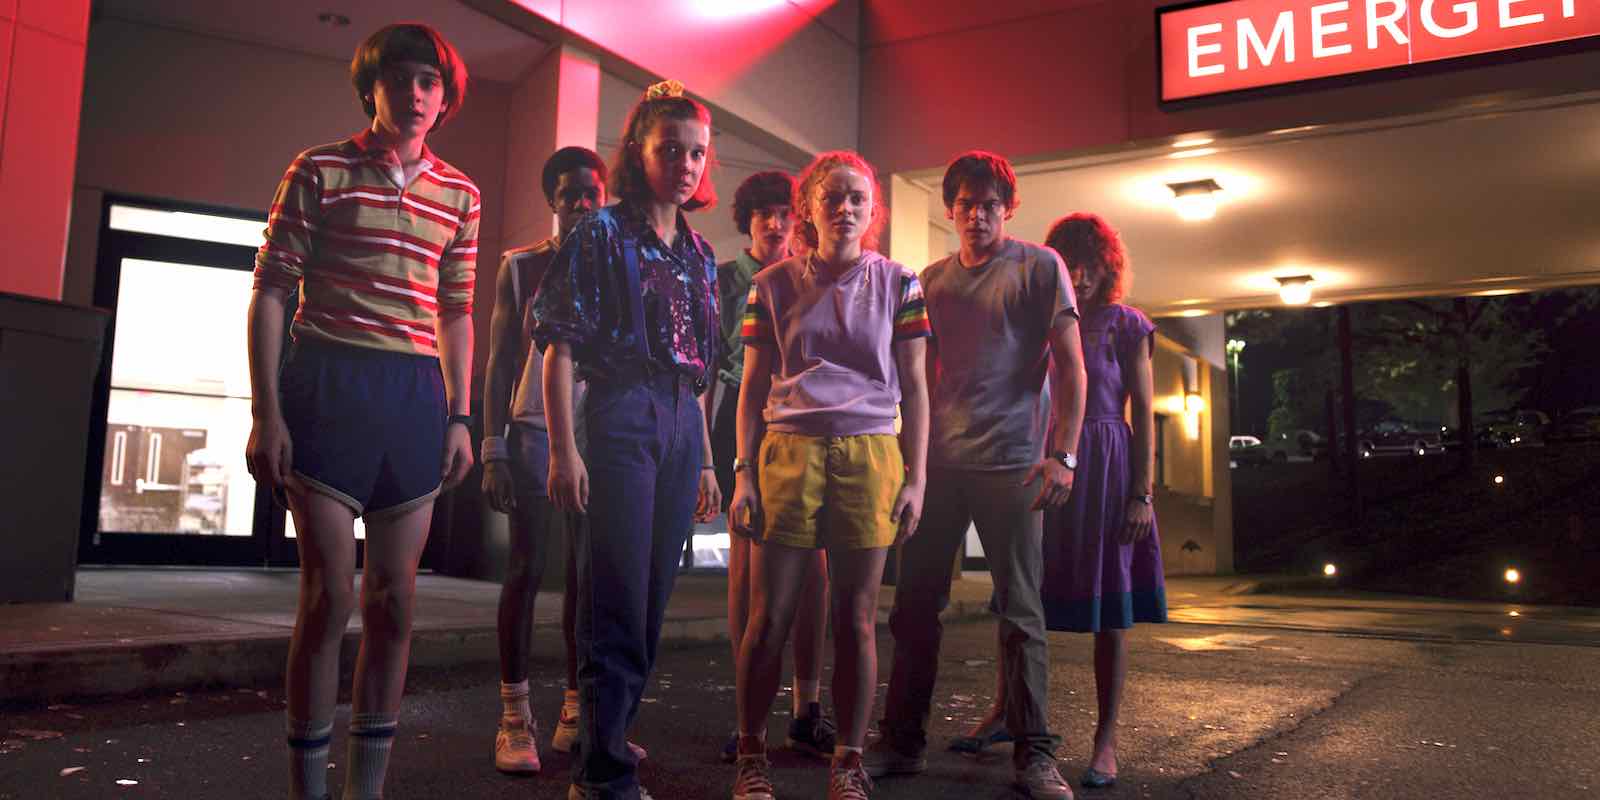 Netflix announced that 'Stranger Things' will return to Netflix on July 4th, 2019 for a third season. Here's what we know so far.